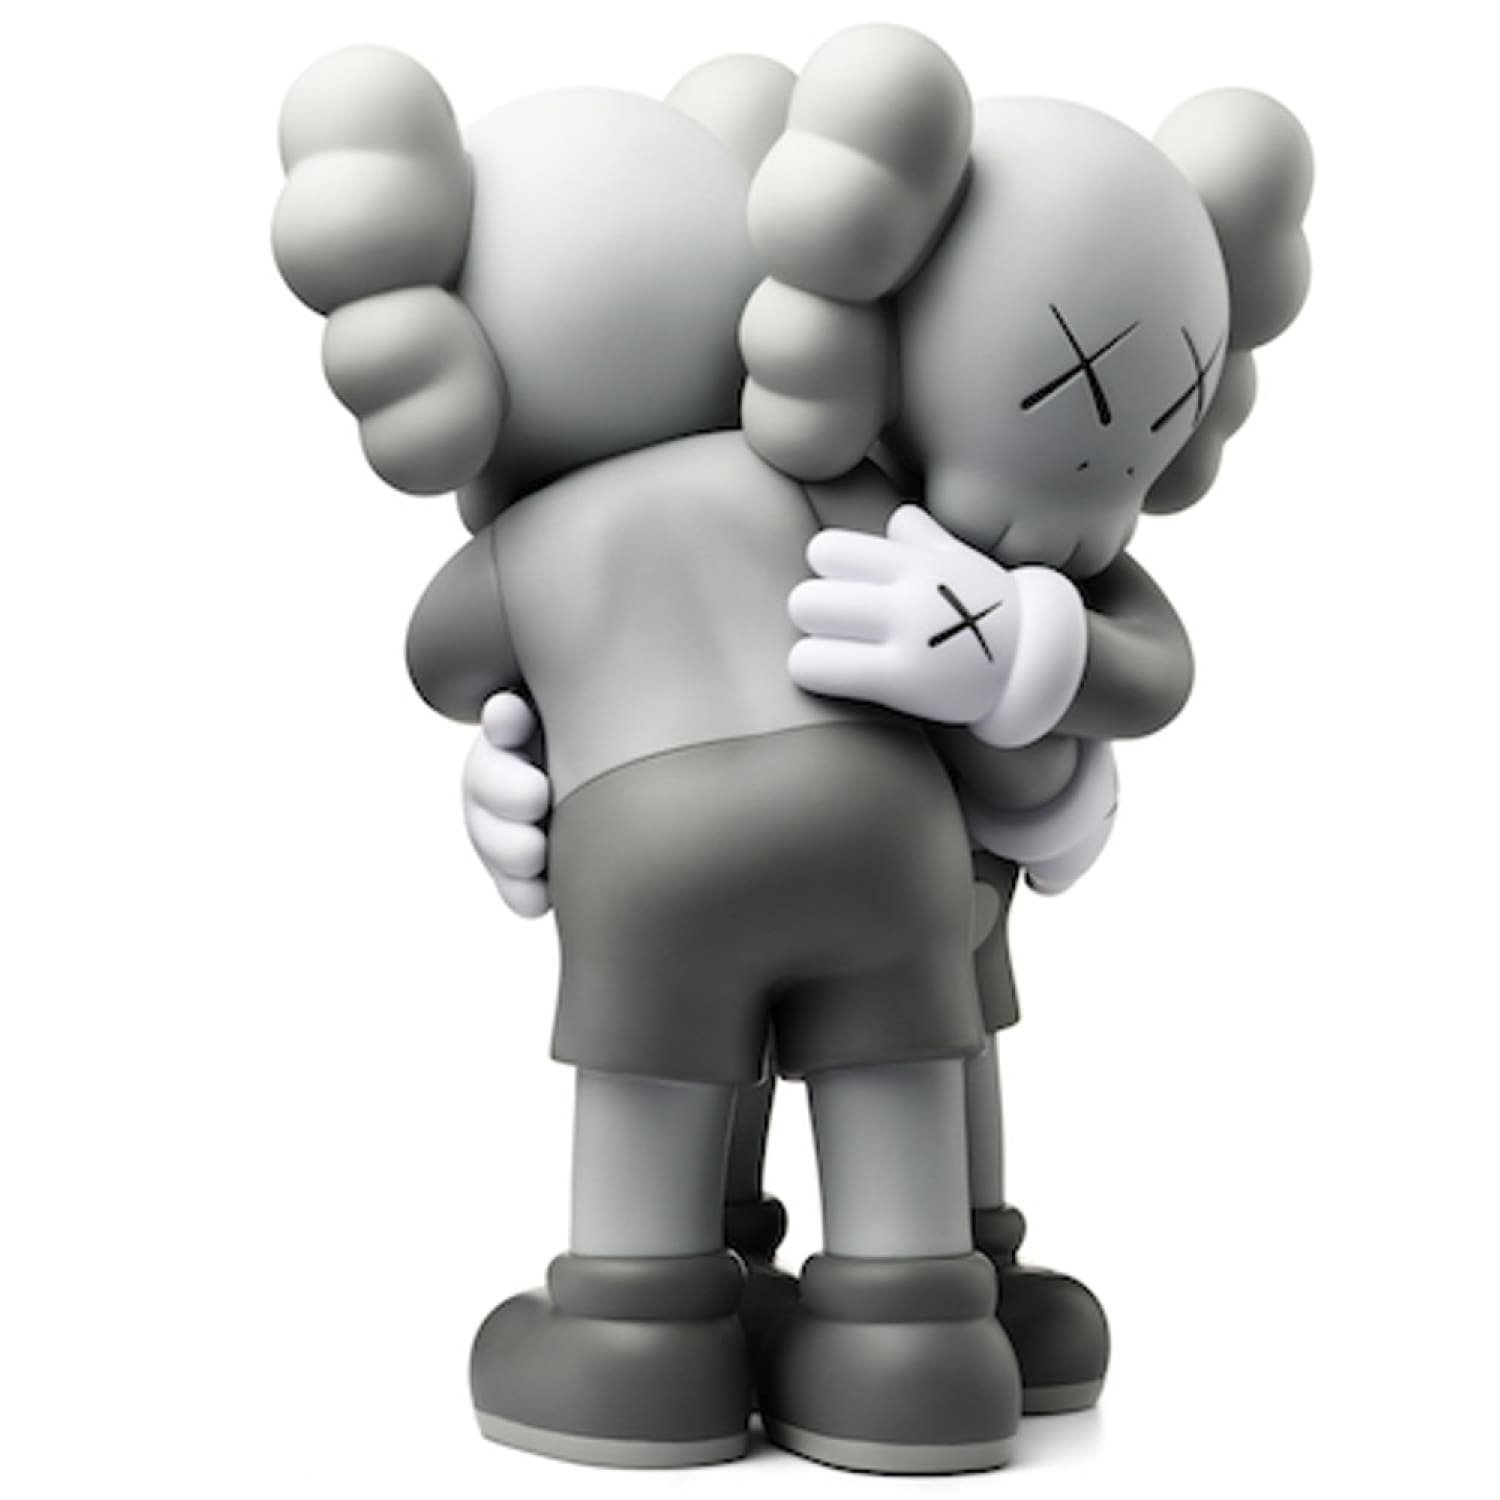 Together gray vinyl figure by Kaws from 2018 - Dope! Gallery